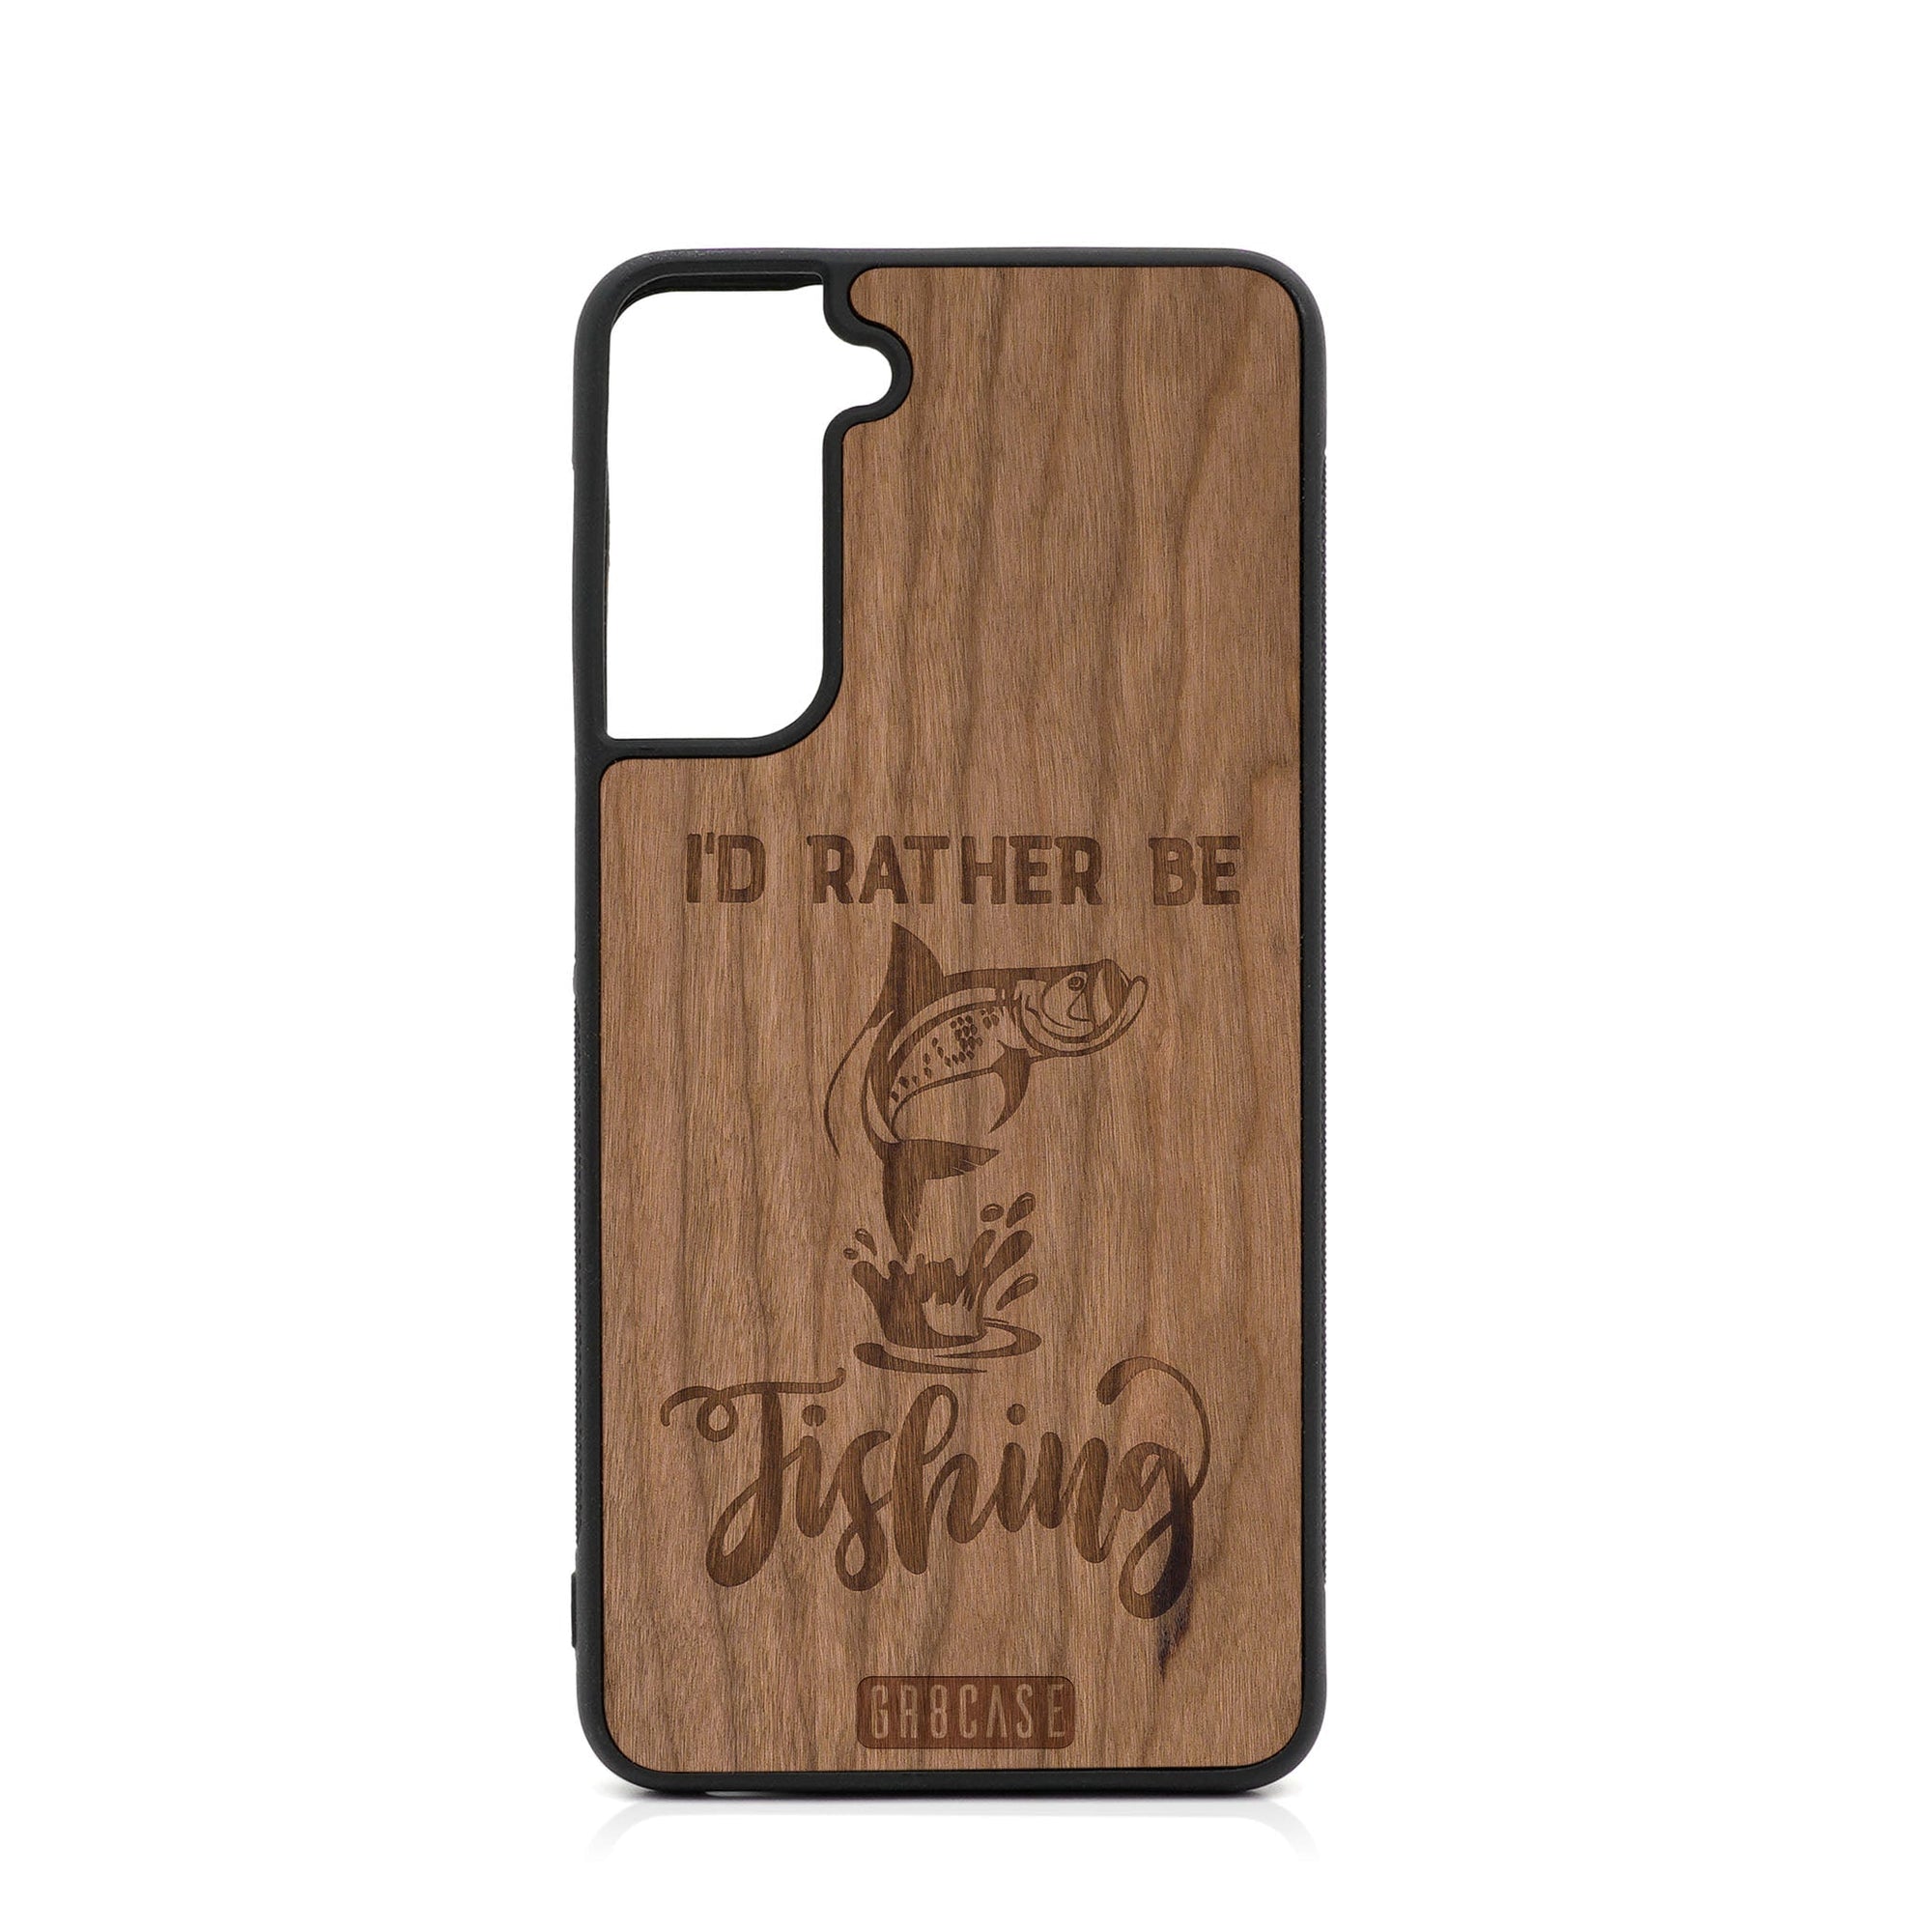 I'D Rather Be Fishing Design Wood Case For Samsung Galaxy S21 FE 5G